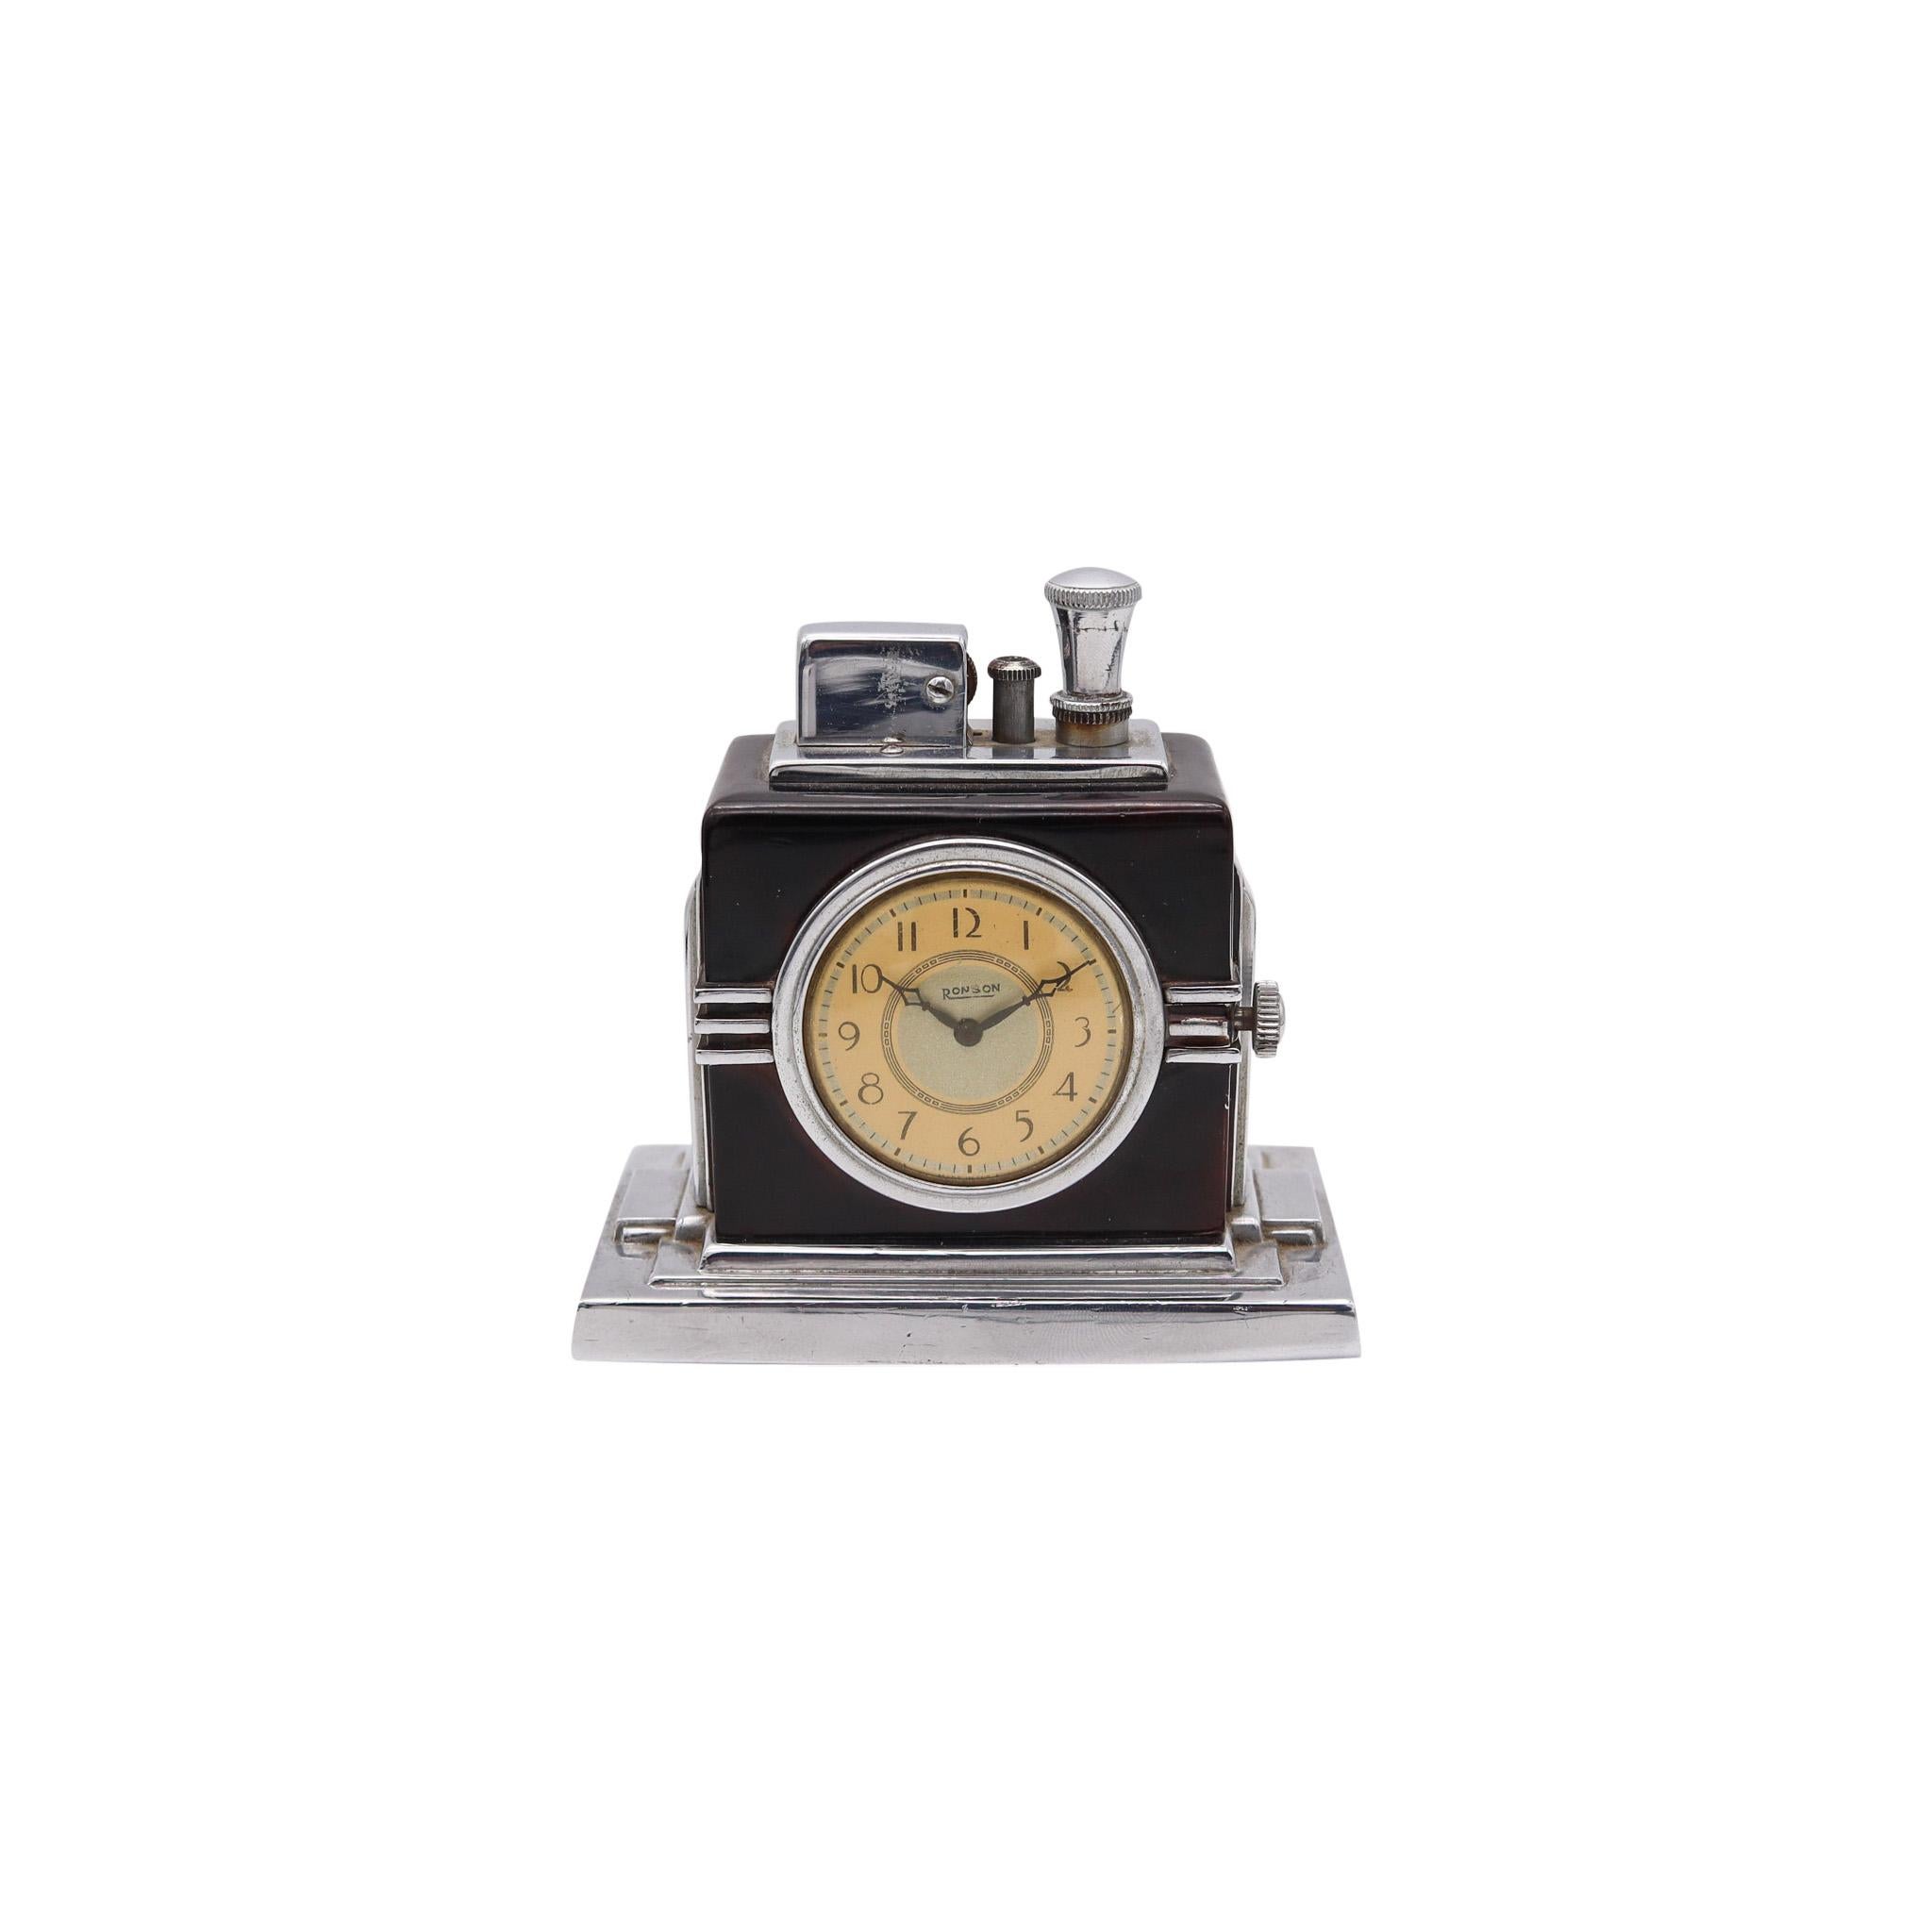 A Maltese clock & touch tip lighter designed by Ronson.

This is an extremely rare Ronson Maltese clock Touch-Tip lighter. This is a very iconic piece made in 1936 at Newark, New Jersey in the United States by the Ronson Art Metal Works Inc. This